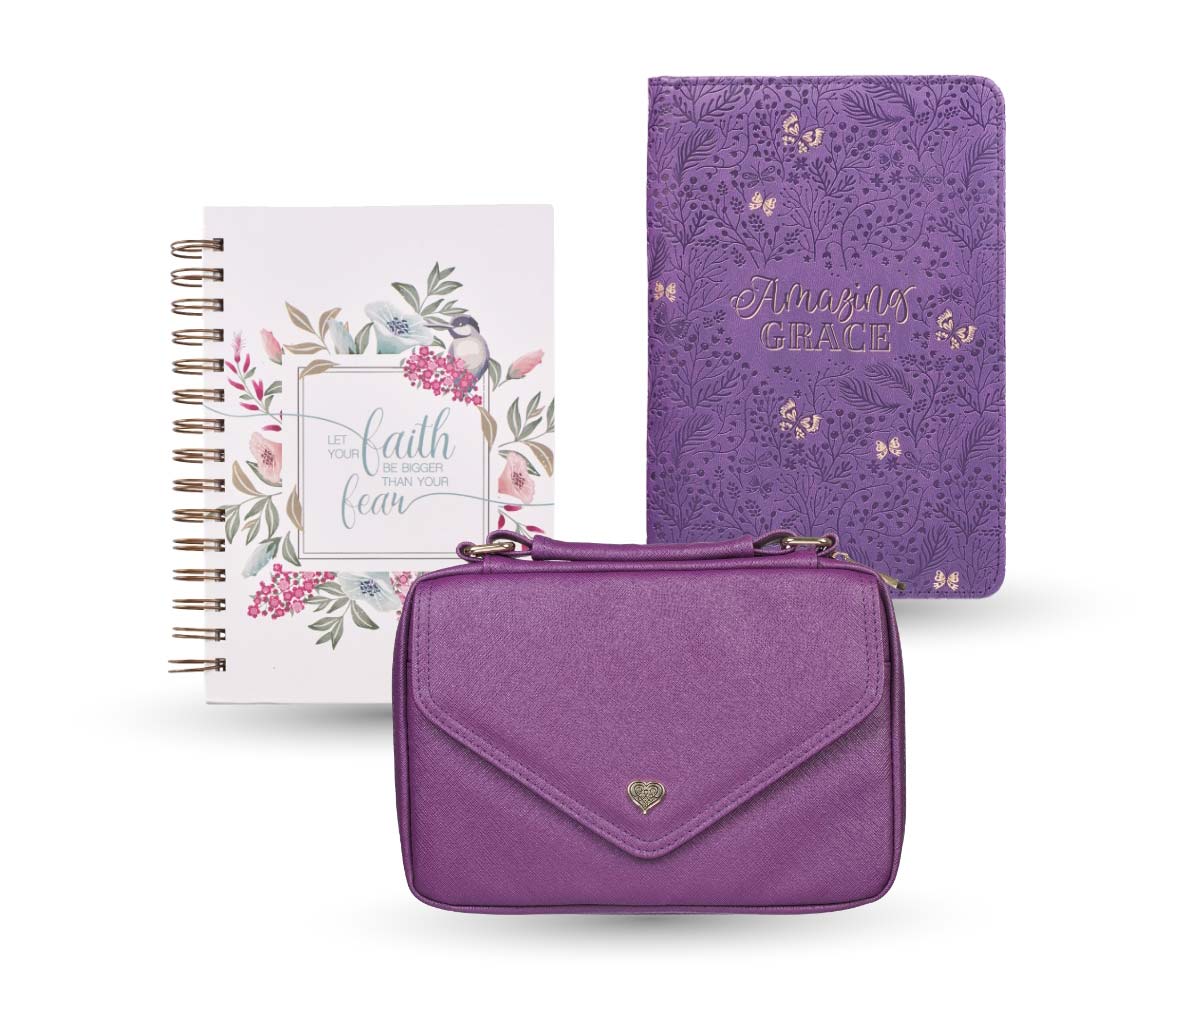 White wirebound journal, purple Bible study kit, and purple Bible cover